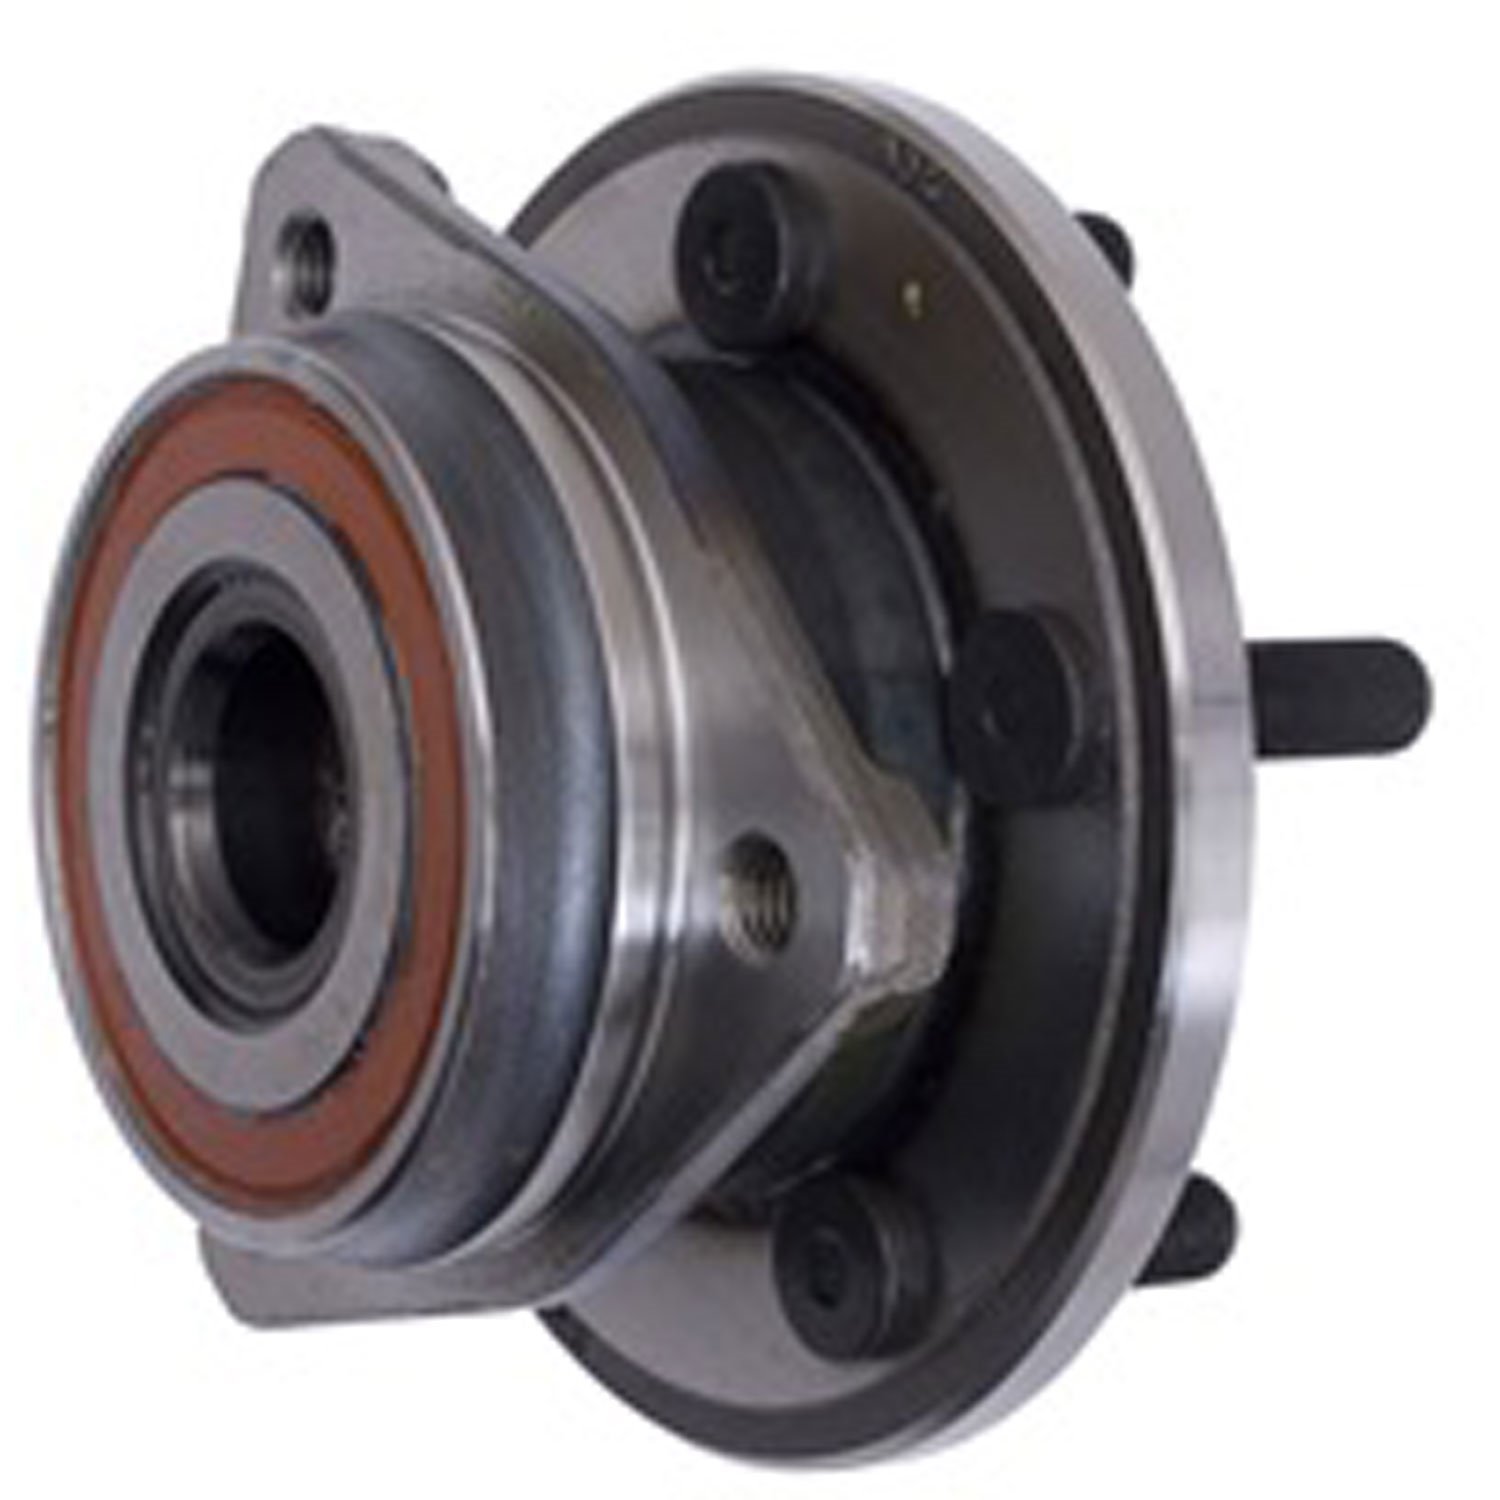 Front Axle Hub Assembly from Omix-ADA fits 00-06 Jeep TJ and LJ Wrangler also fits 00-01 Jeep Cherok